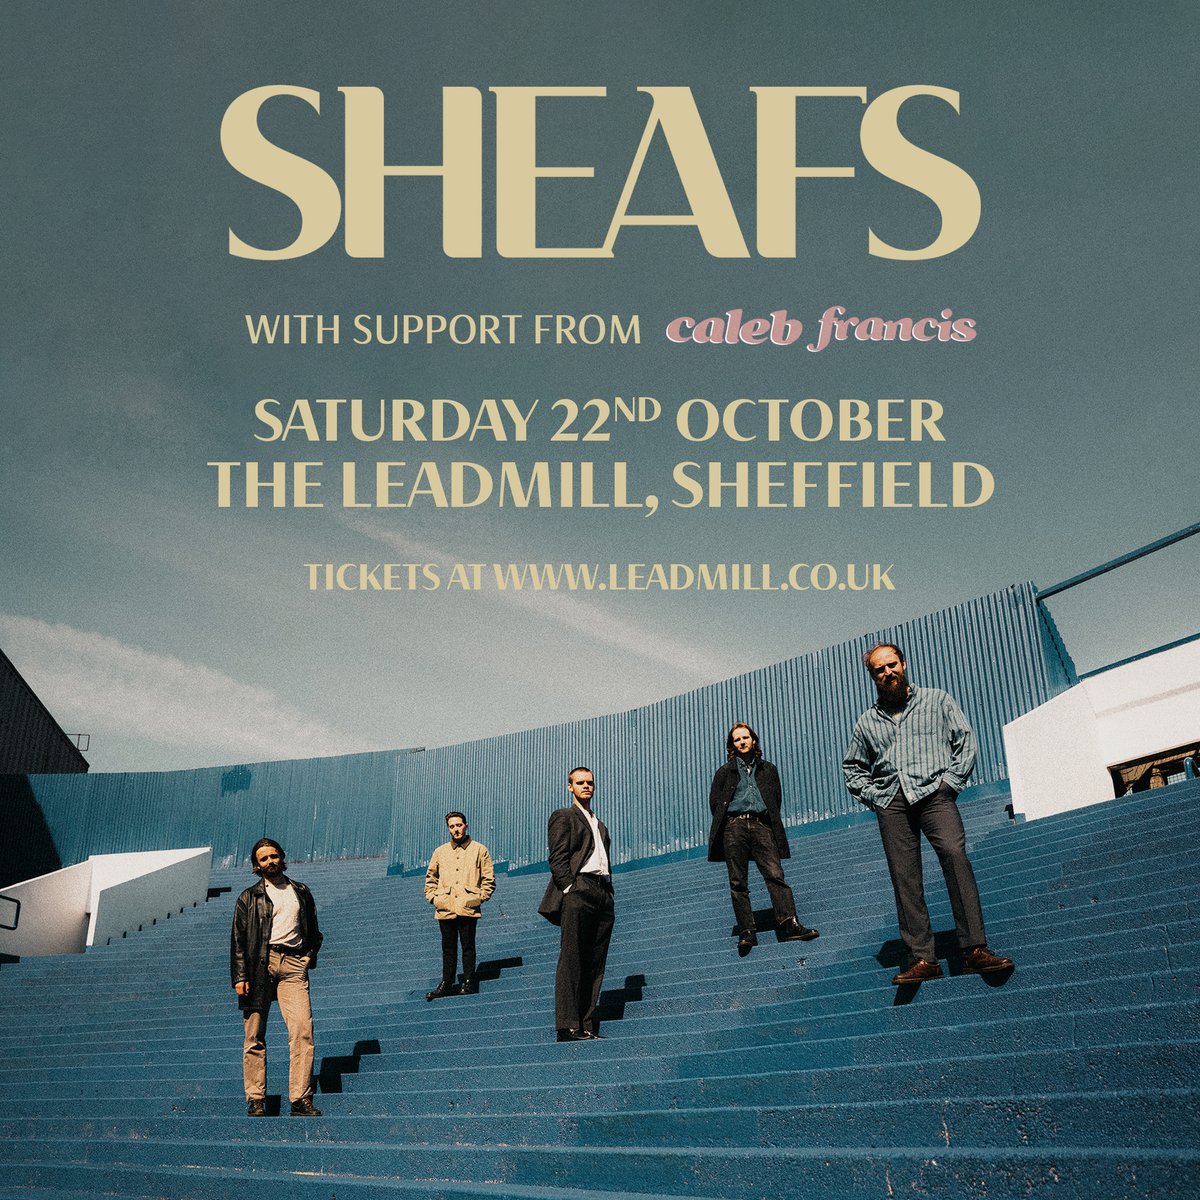 Exactly 10 tickets left on our website for the hugely anticipated @sheafsband headline show later this month 🔥 Don't say we didn't warn you, final tickets available here > bit.ly/SHEAFSLM